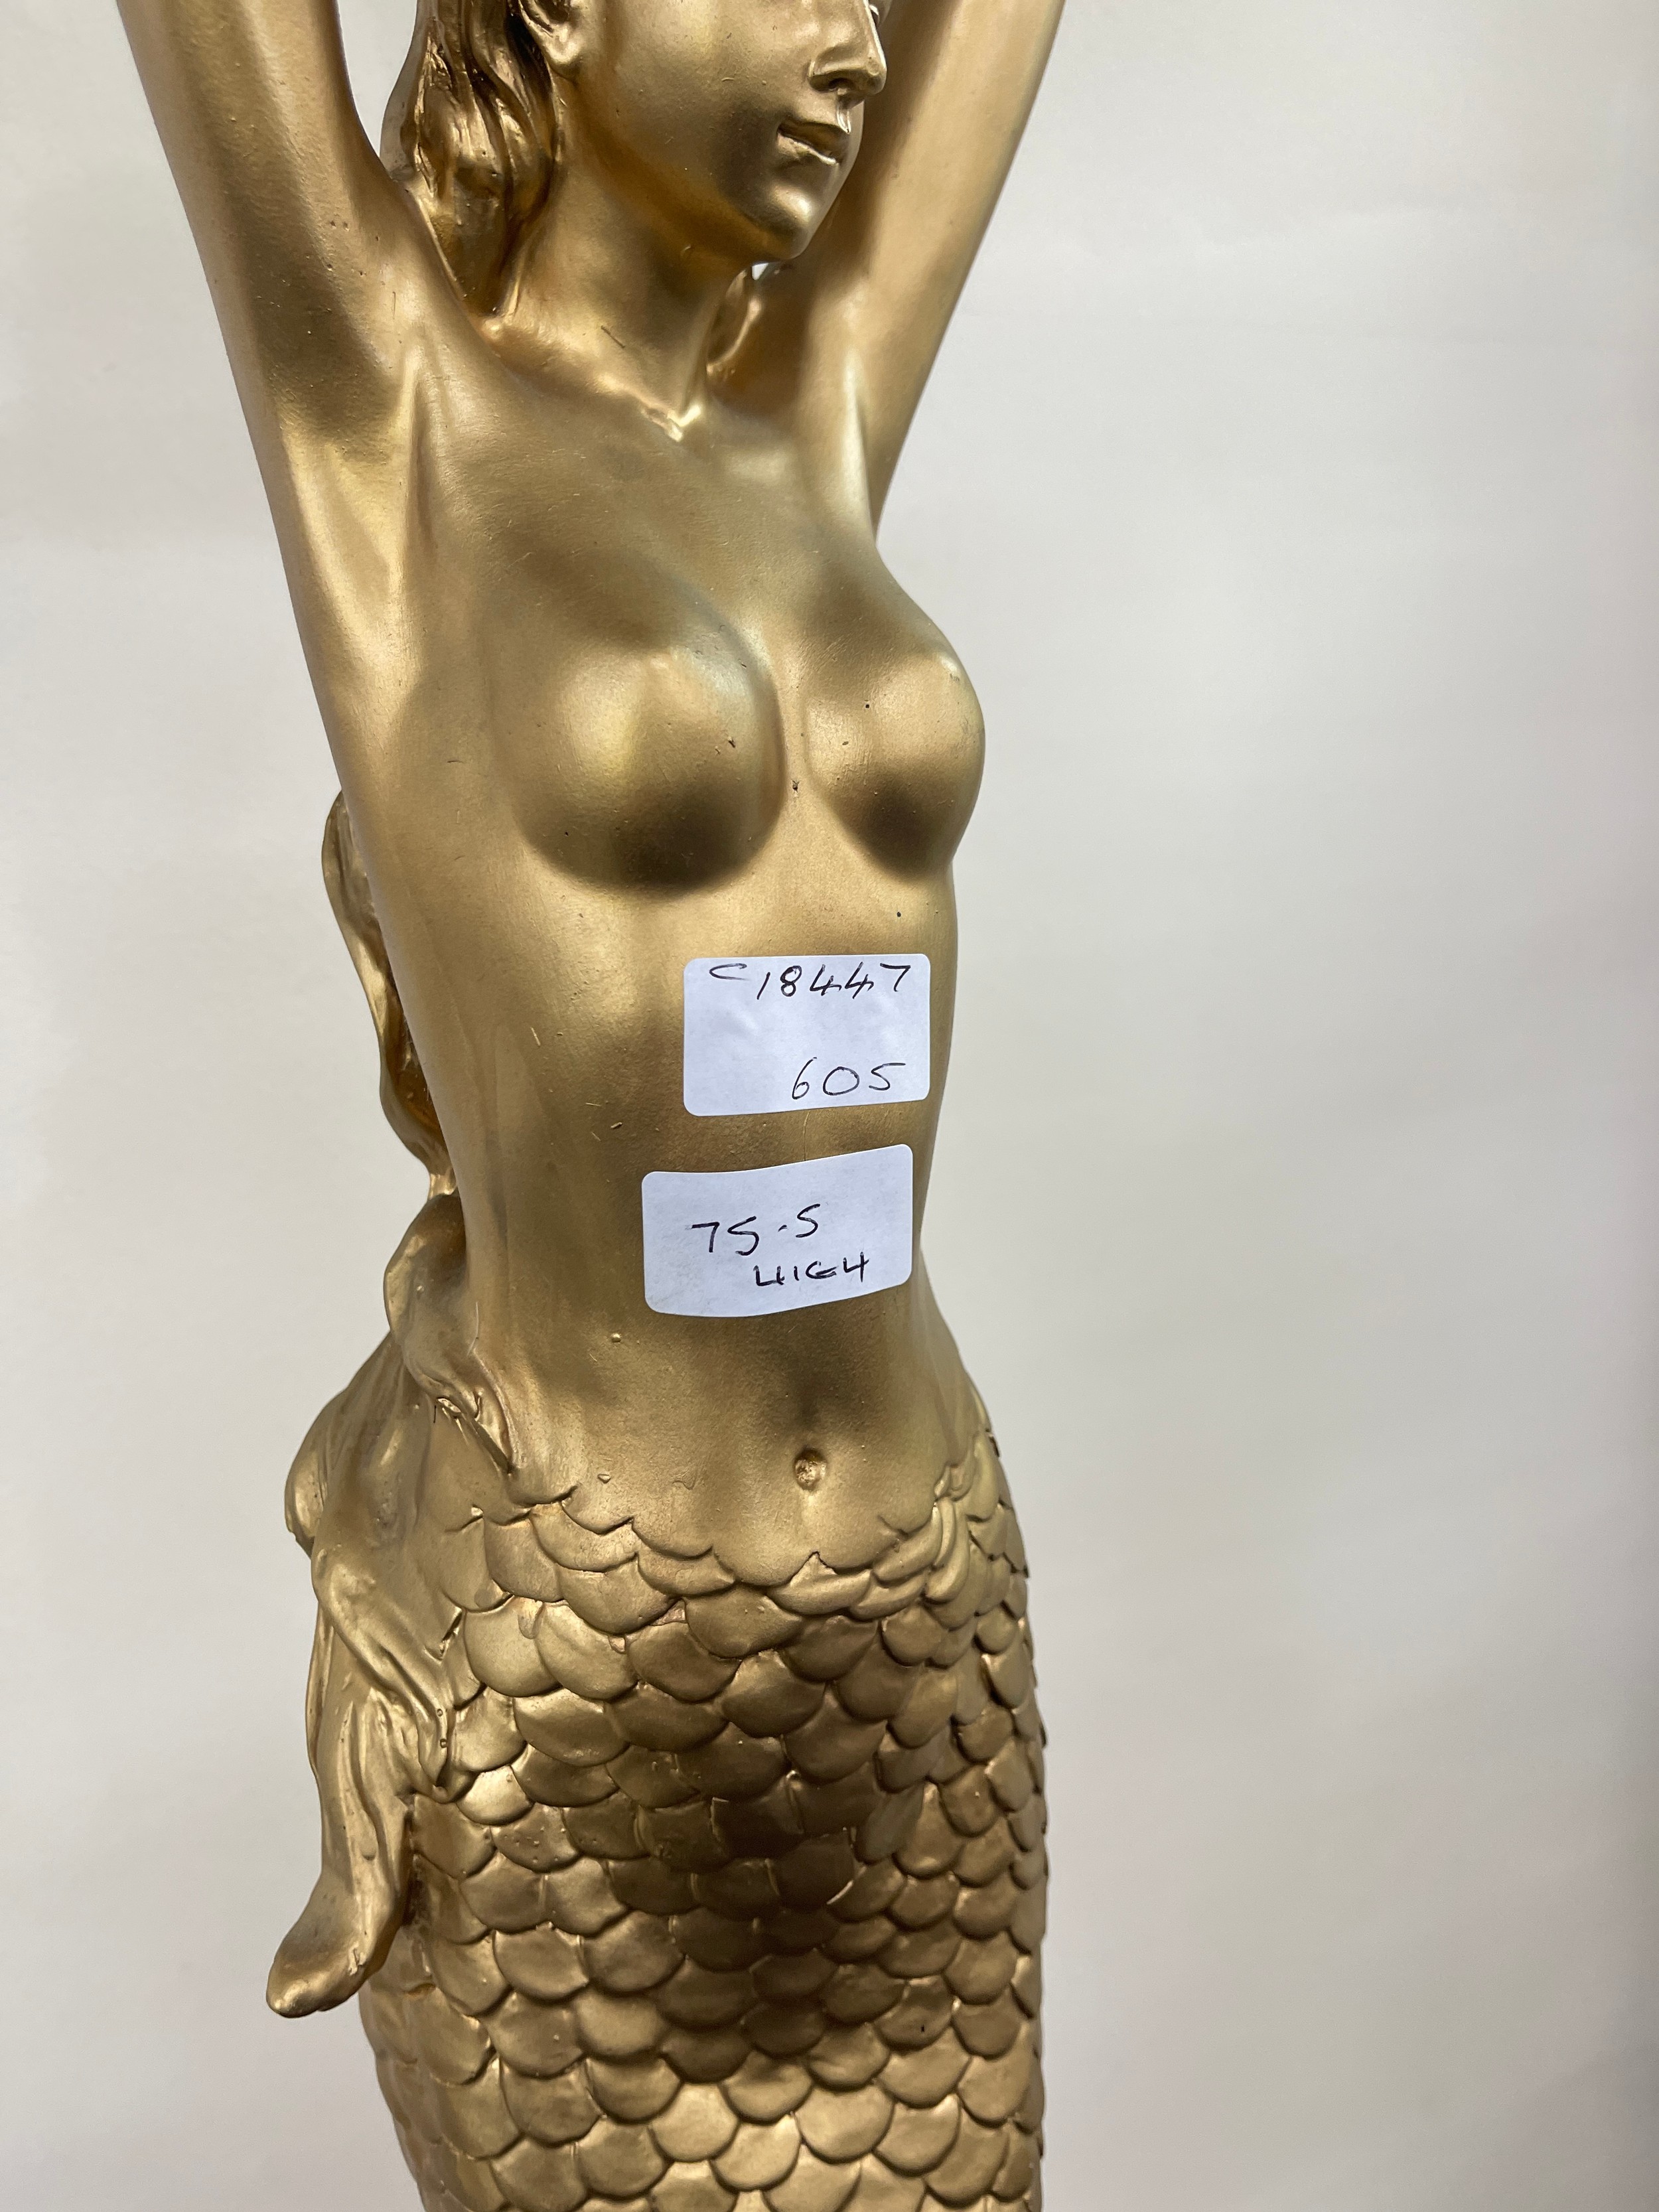 Tall mermaid resin lamp on plinth, approximately 75.5 inches tall, working order with glass shade - Image 11 of 11